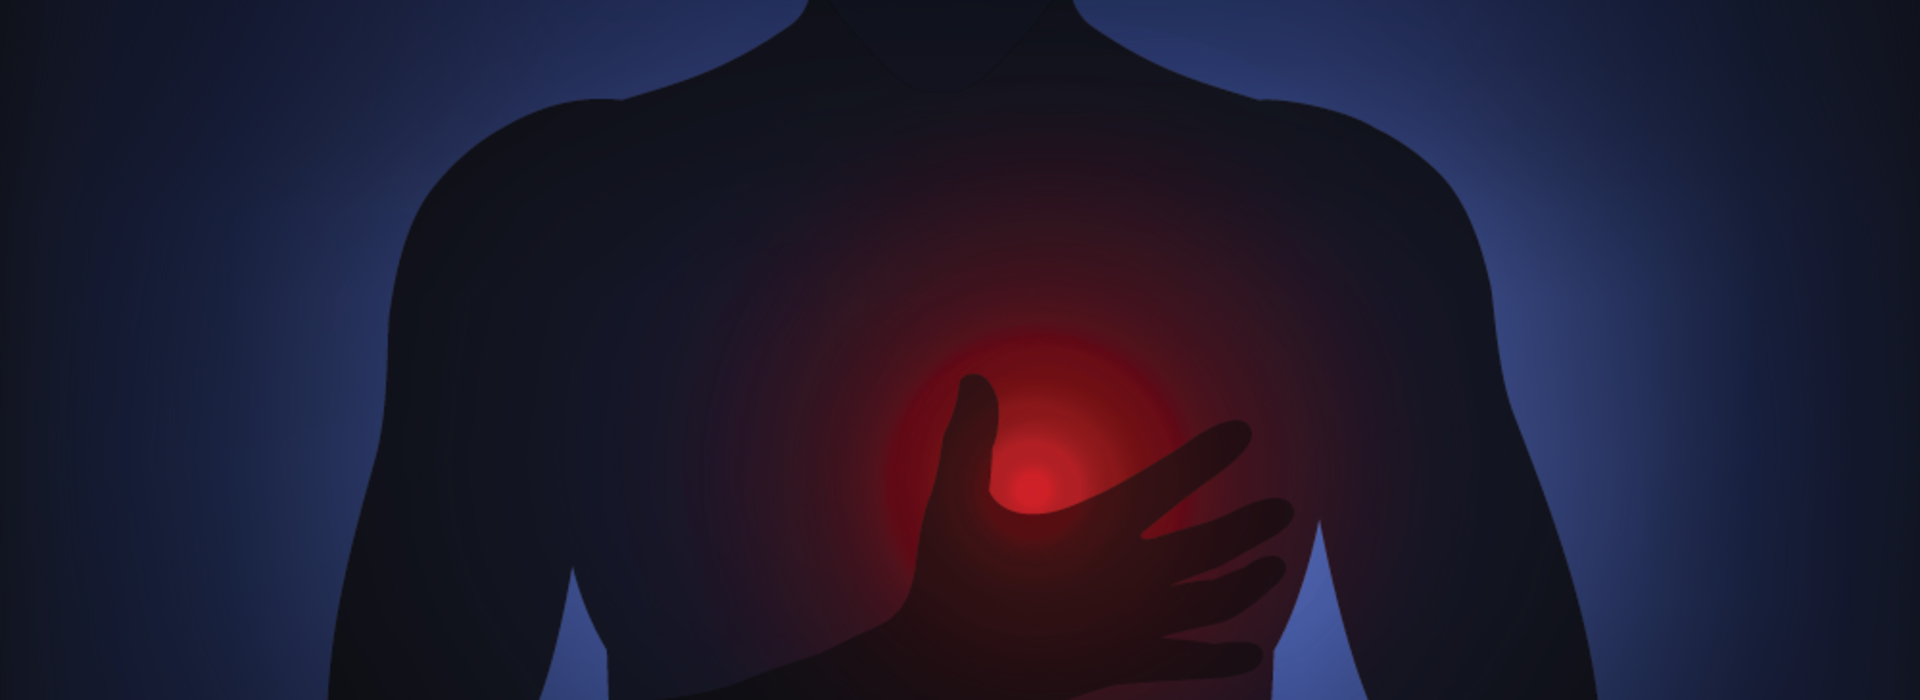 An illustration of a man holding his glowing heart.